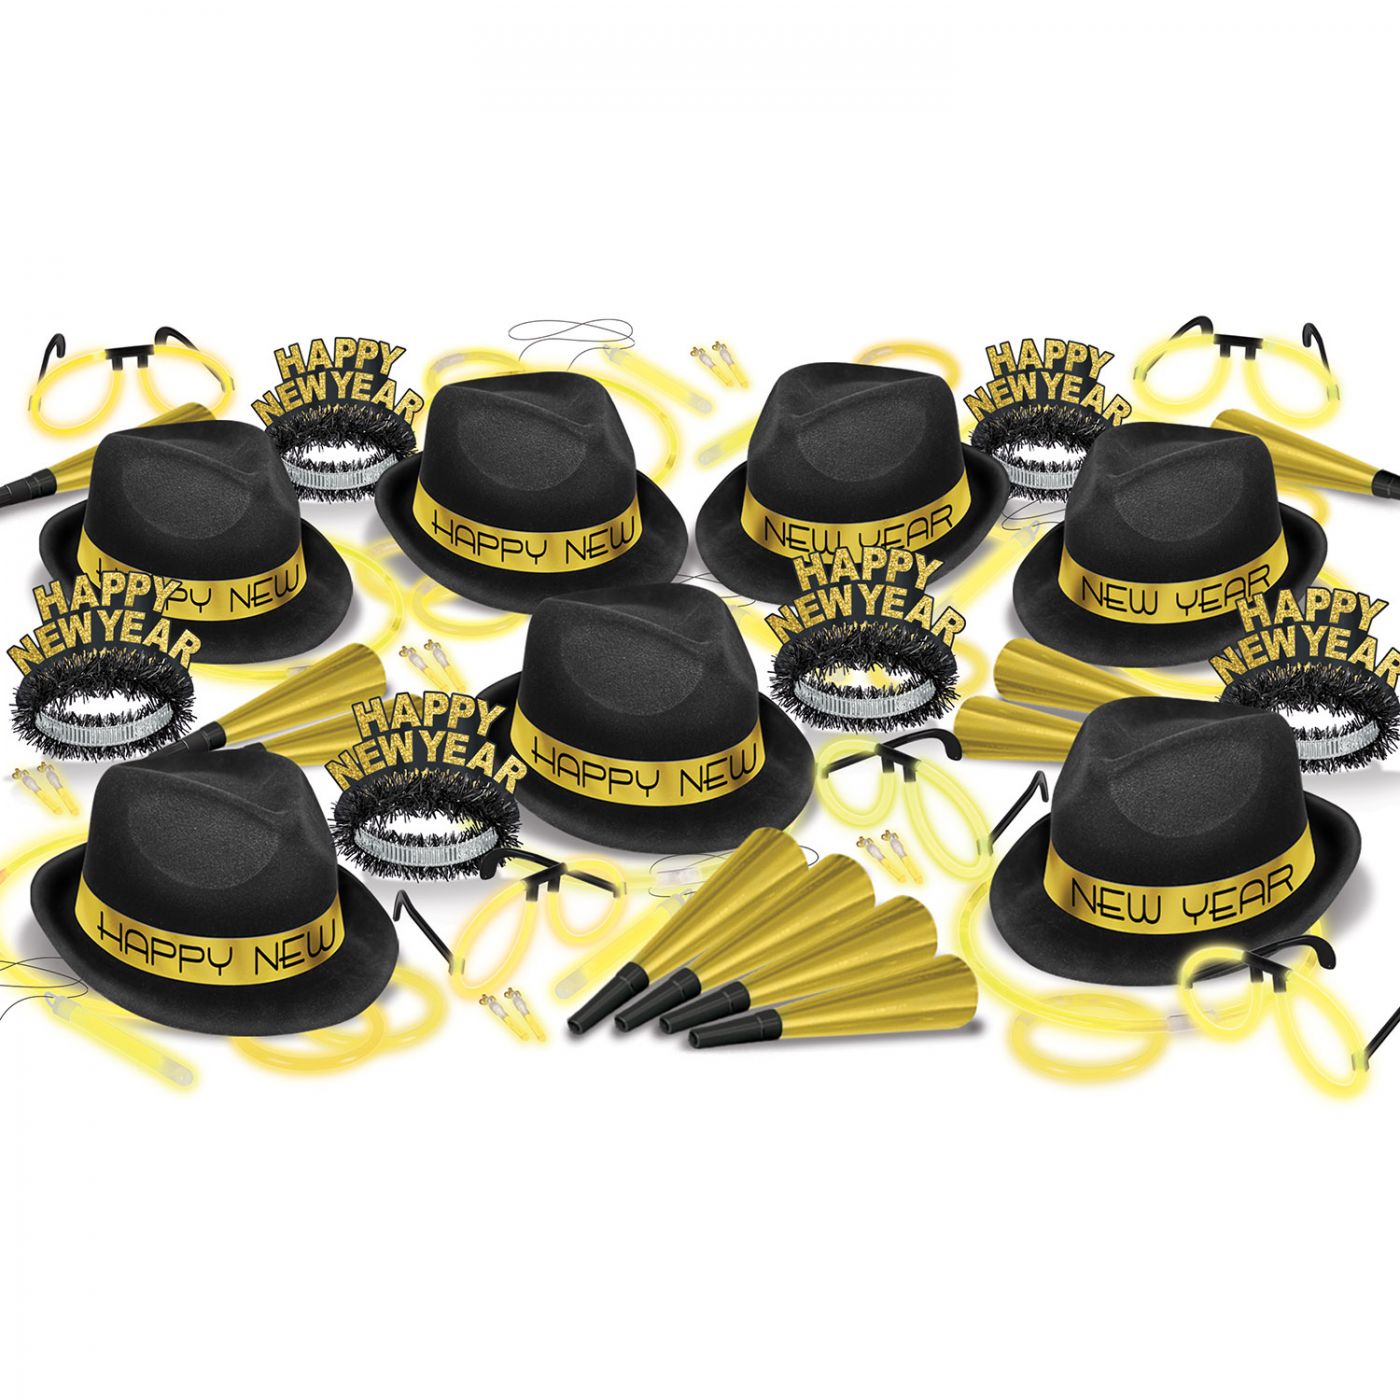 Gold Glow Assortment for 50 (1) image